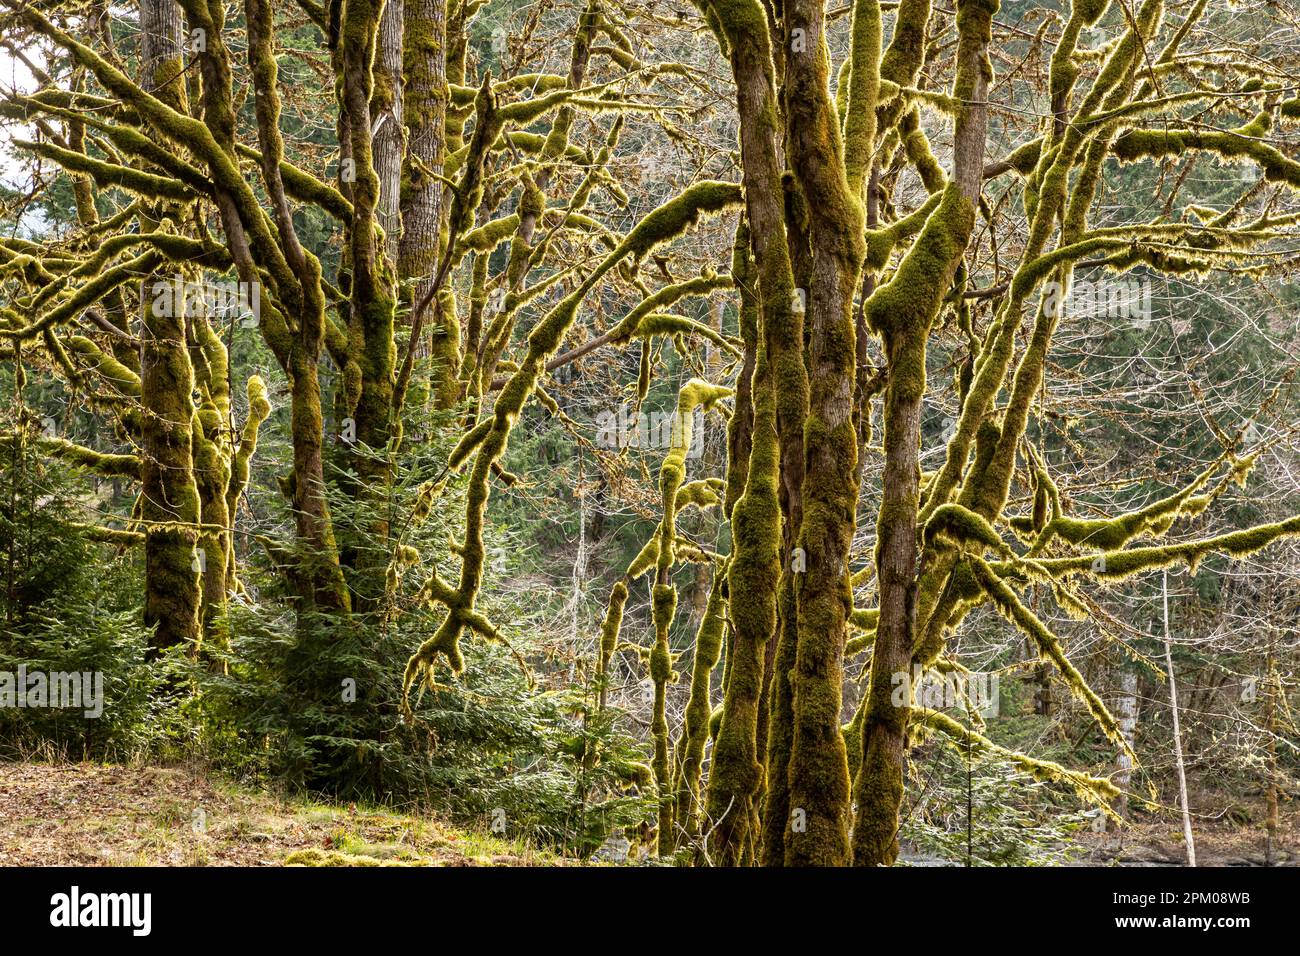 WA23309-00..,.WASHINGTON - Moss covered big leaf maple trees in a mixed forest along the washed-out Elwha River Road. Stock Photo